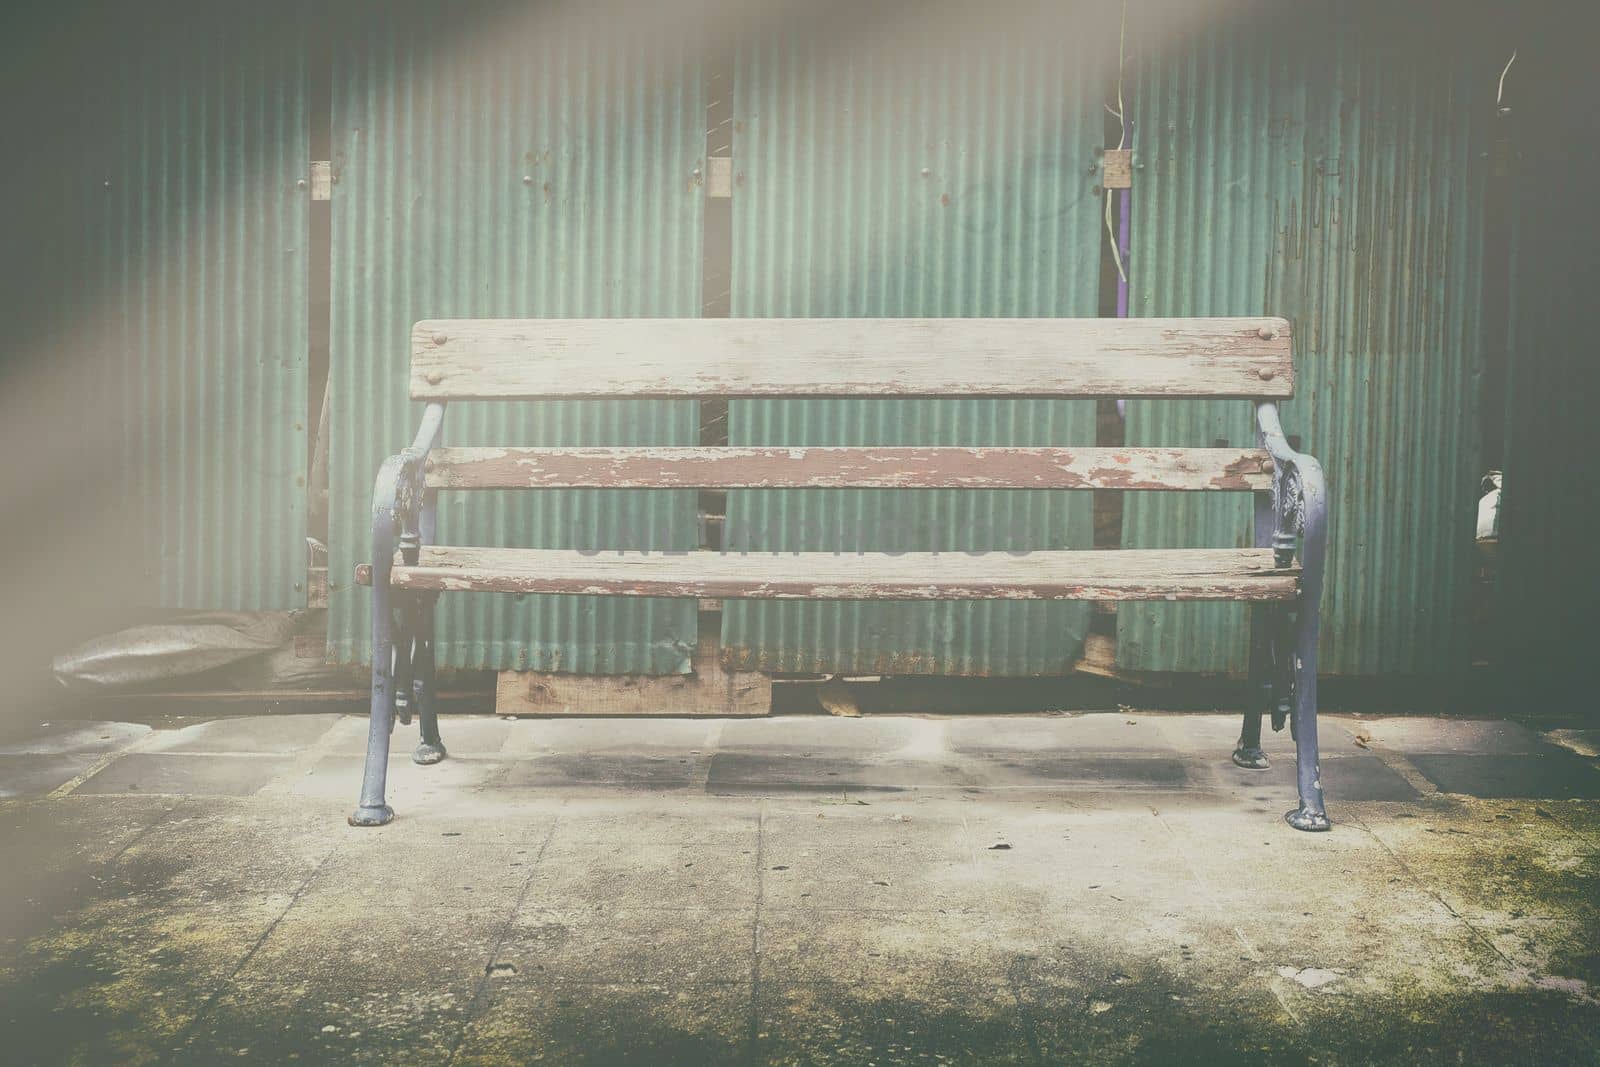 Old Public Bench. (Vintage Style)